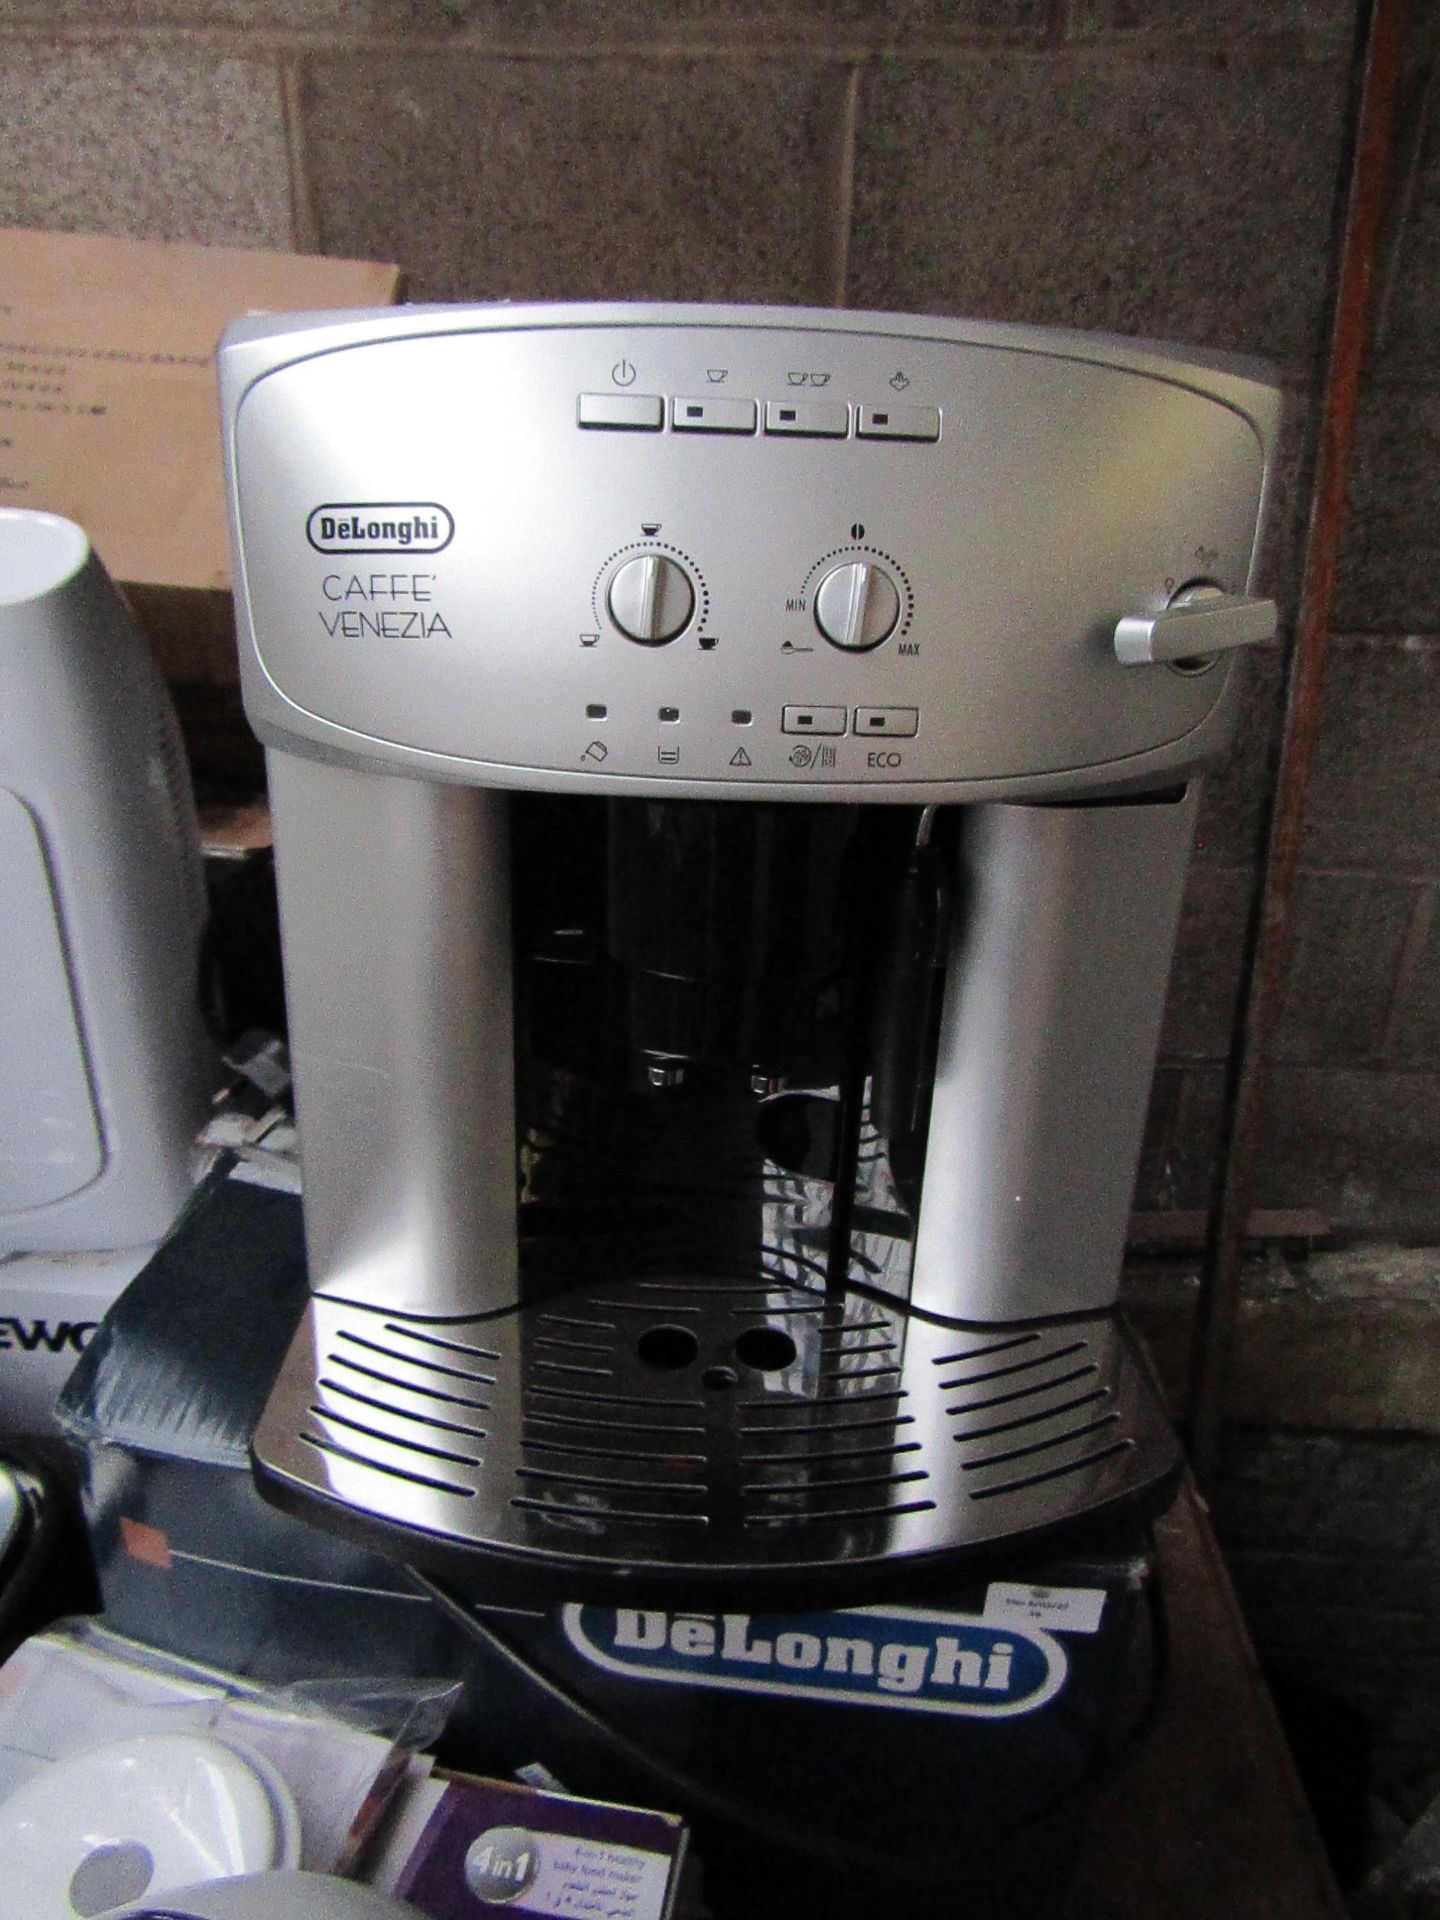 Delonghi - Caffe Venezia bean to cup coffee machine, powers on but cannot check any further, comes